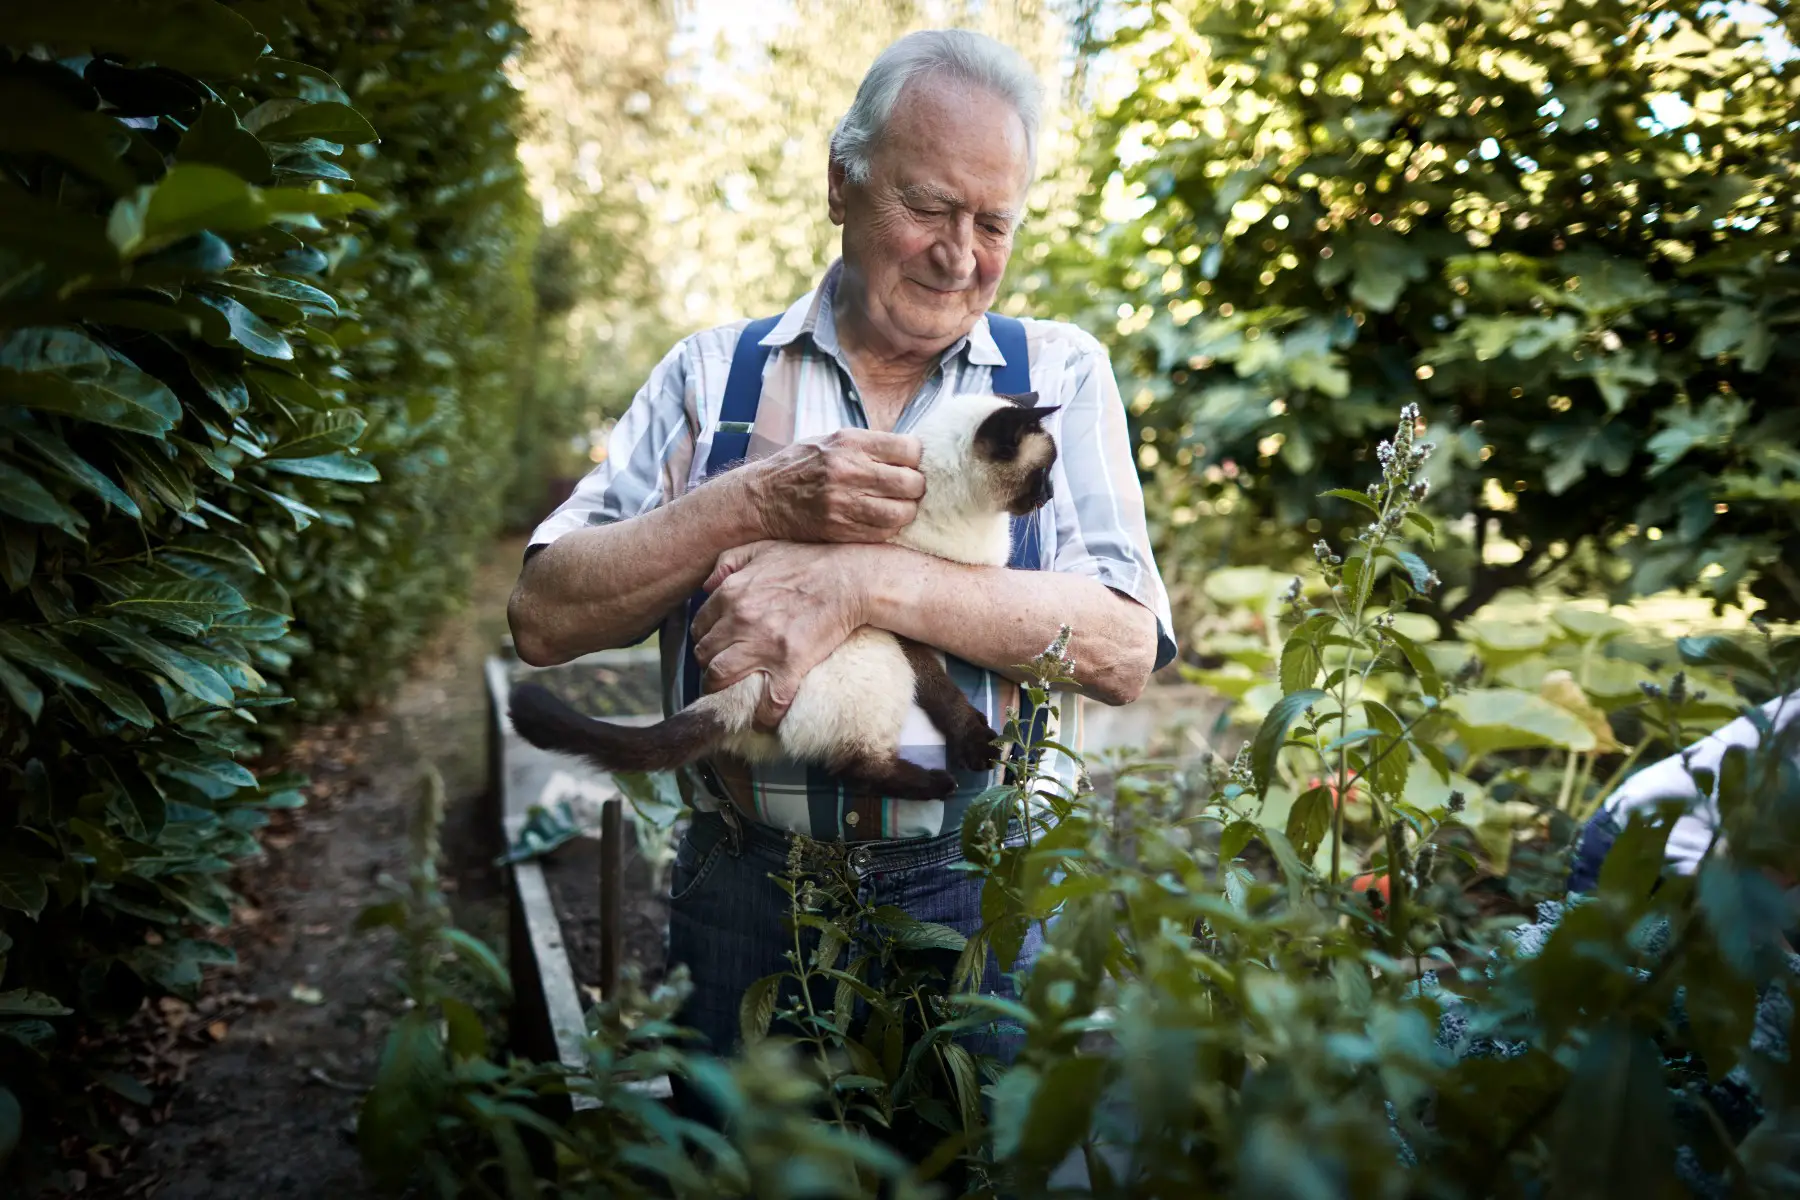 Elderly man standing in his garden, petting a siamese cat and smiling.